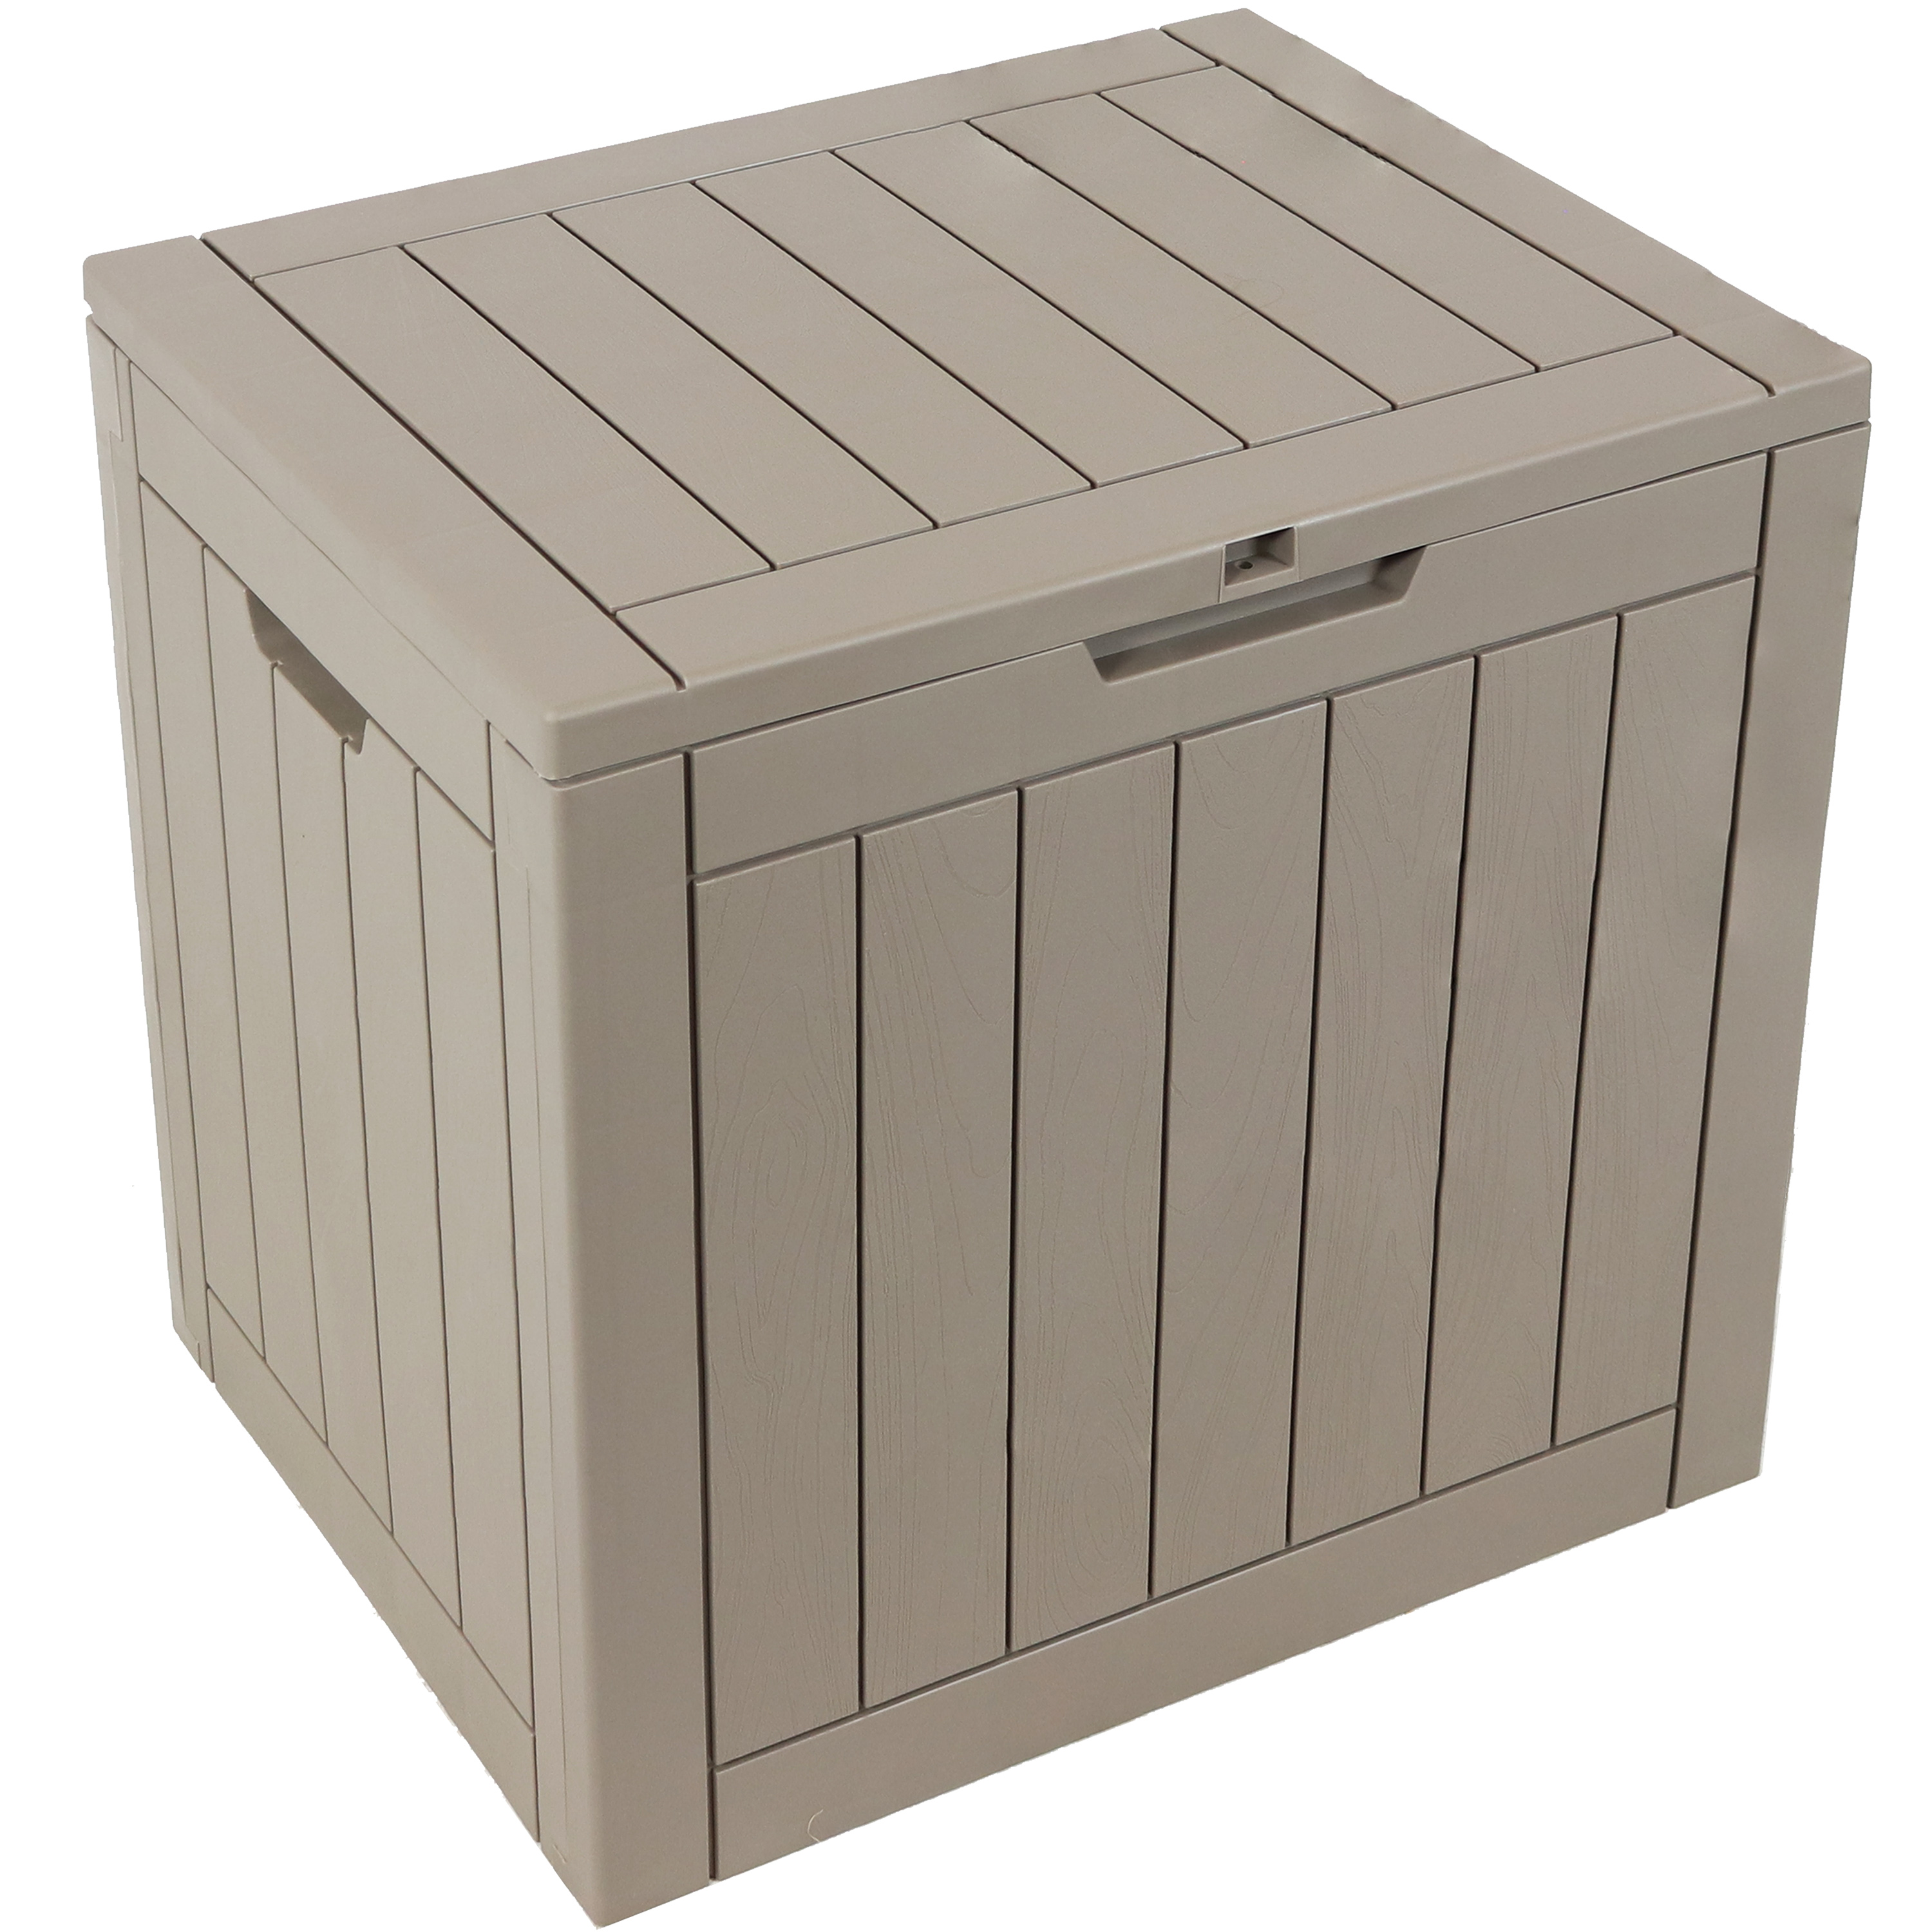 Sunnydaze Small Deck Box with Storage and Lockable Lid - 32 Gal. - Driftwood - image 1 of 15